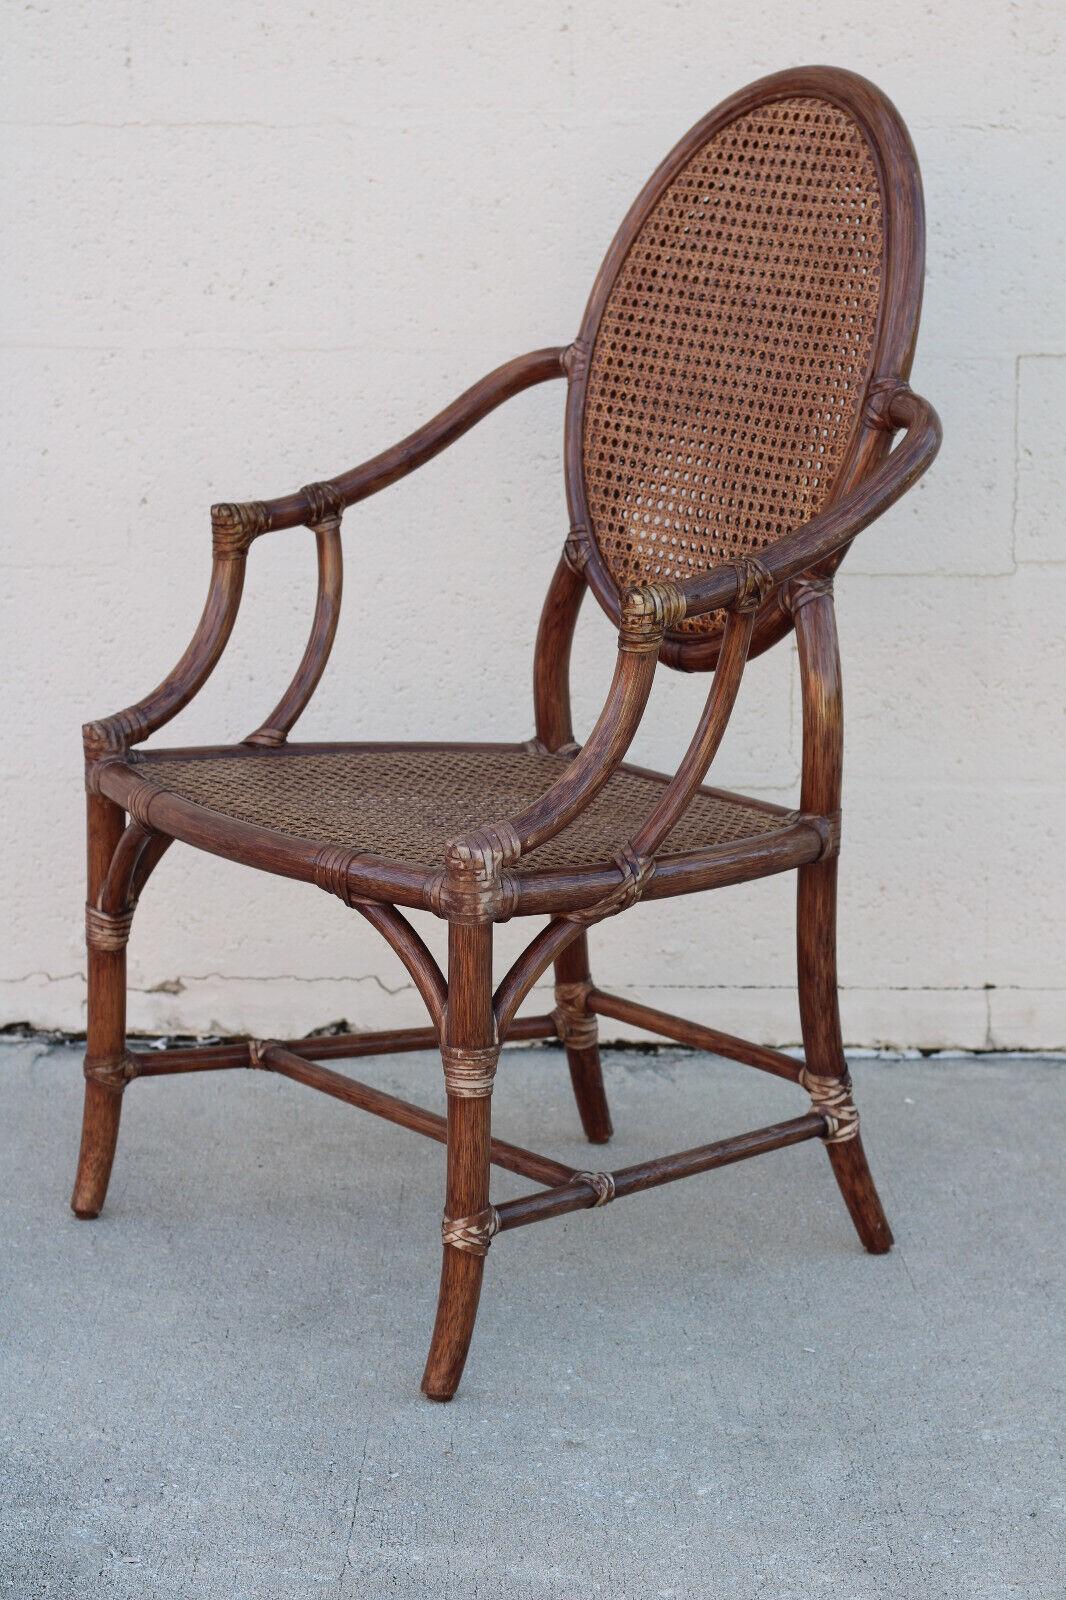 A set of four graceful and airy dining chairs designed by breakthrough innovator Elinor McGuire. Chairs have an oval rattan double-caned back and the original tobacco brown finish. This vintage set of arm chairs has McGuire’s trademark rawhide